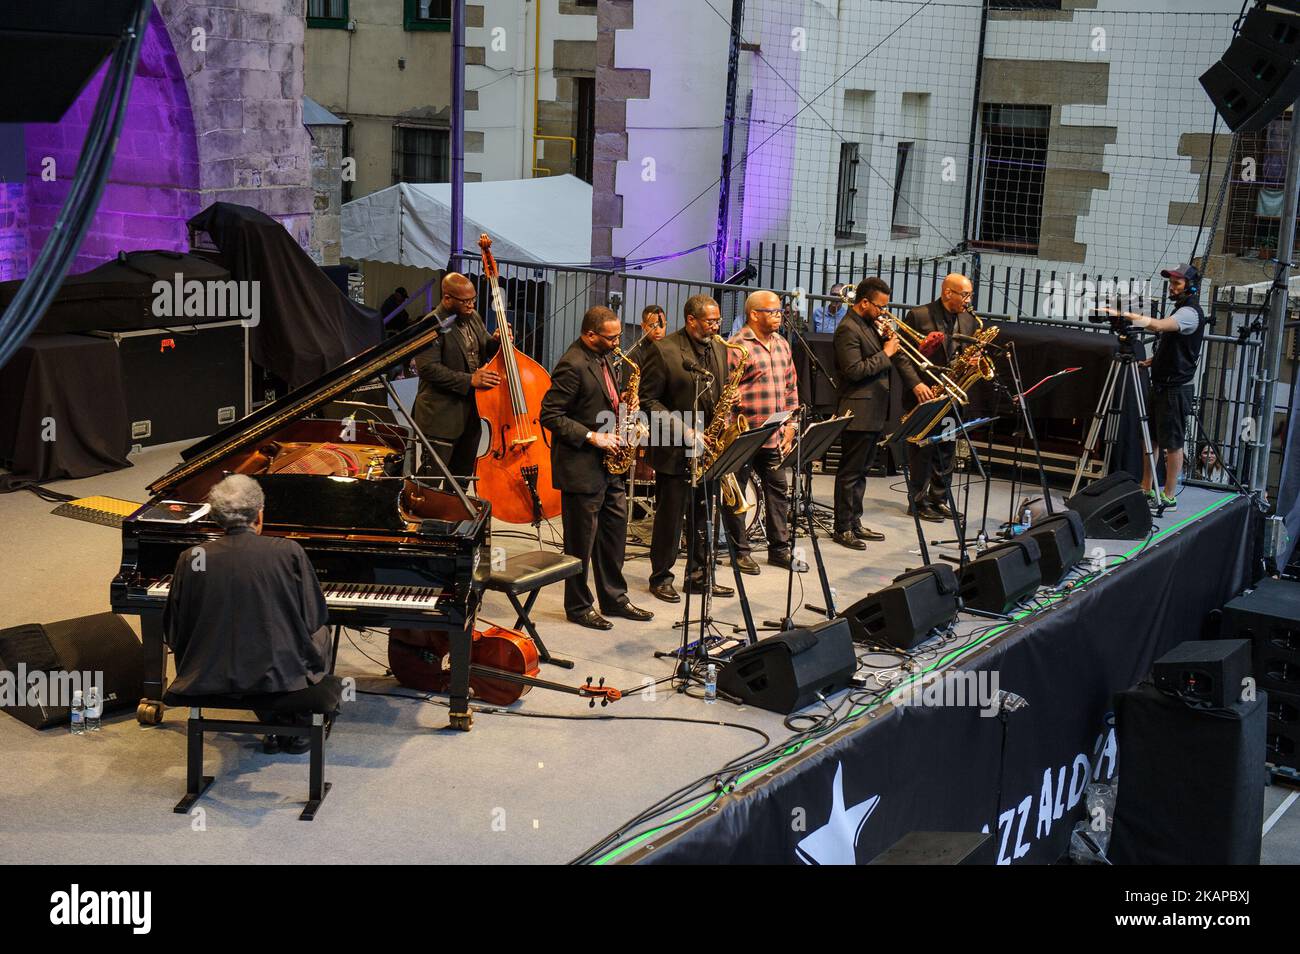 Performance of the South African pianist Abdullah Ibrahim together with Terence Blanchard (trumpet), Noah Jackson (bass, cello), Will Terrill (drums), Cleave Guyton Jr. (alto sax, flute, clarinet, piccolo), Lance Bryant (tenor sax), Andrae Murchison (Trombone, Trumpet), Marshall McDonald (baritone sax) on the stage of the Trinidad Square during 52nd edition of Heineken Jazzaldia on July 25, 2017 in San Sebastian, Spain (Photo by Jose Ignacio Unanue/NurPhoto) *** Please Use Credit from Credit Field *** Stock Photo